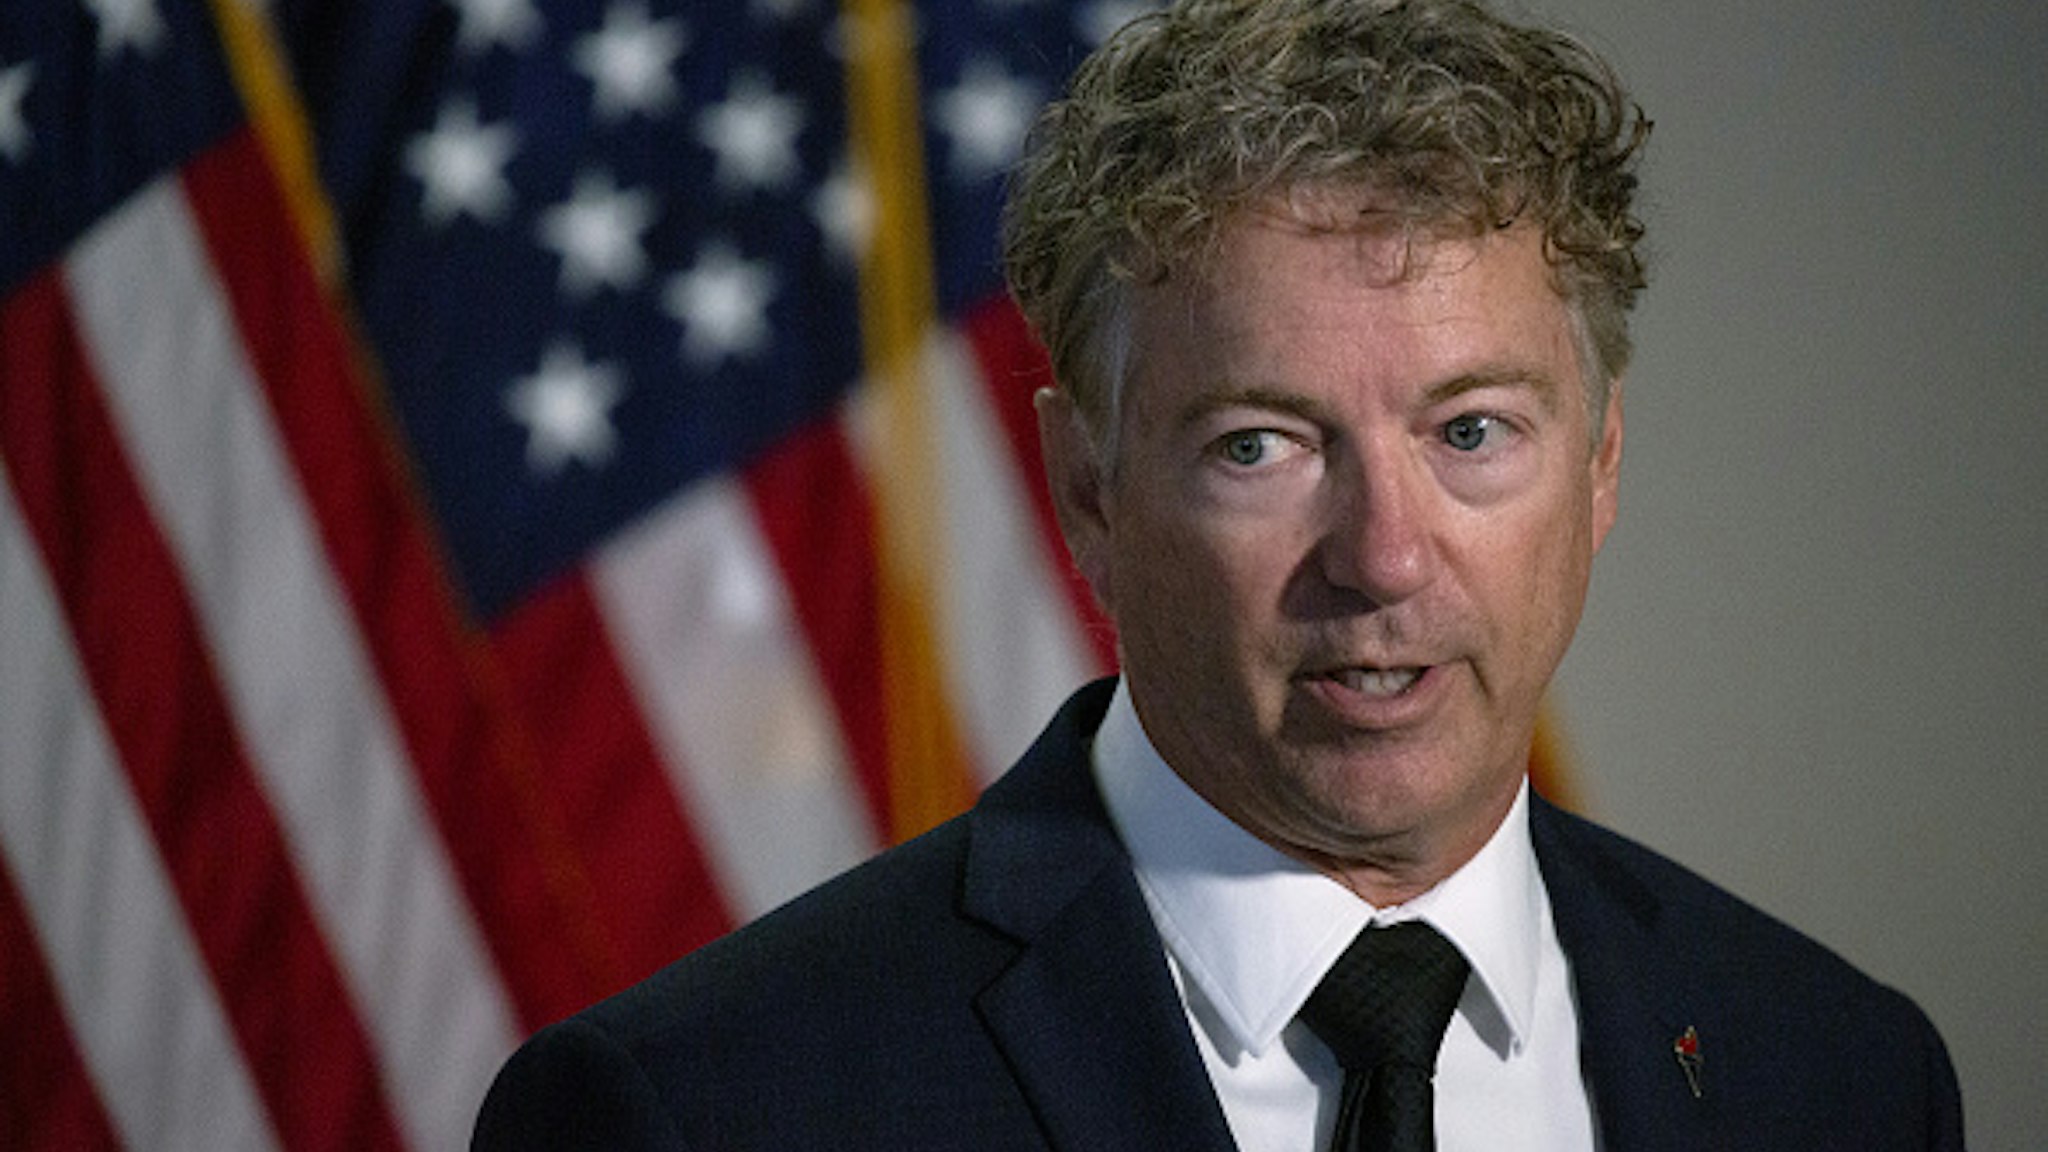 Senator Rand Paul, a Republican from Kentucky, speaks during a news conference after the Senate Republican policy luncheon on Capitol Hill in Washington, D.C., U.S., on Tuesday, July 21, 2020. The White House and Congress have only a few weeks to come up with another stimulus to prevent the economic rout caused by the coronavirus from deepening as the outbreak is surging across the country.